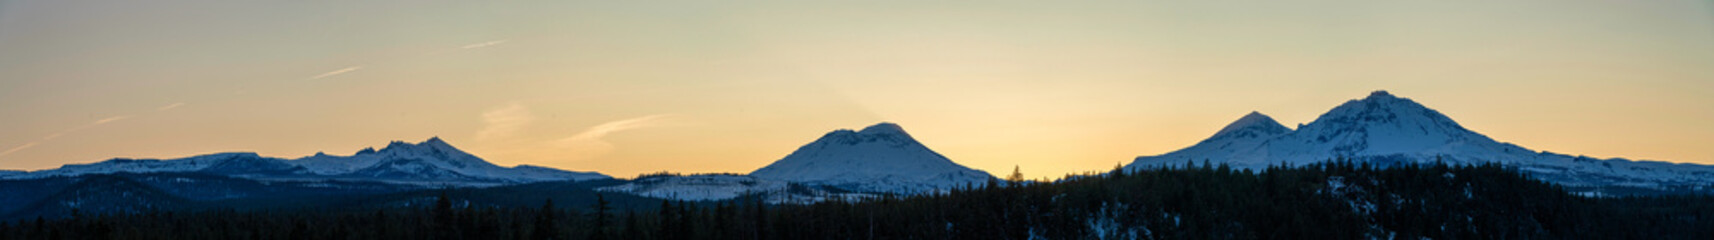 Three Sisters Mountains in the Oregon Cascades at Sunset in Winter